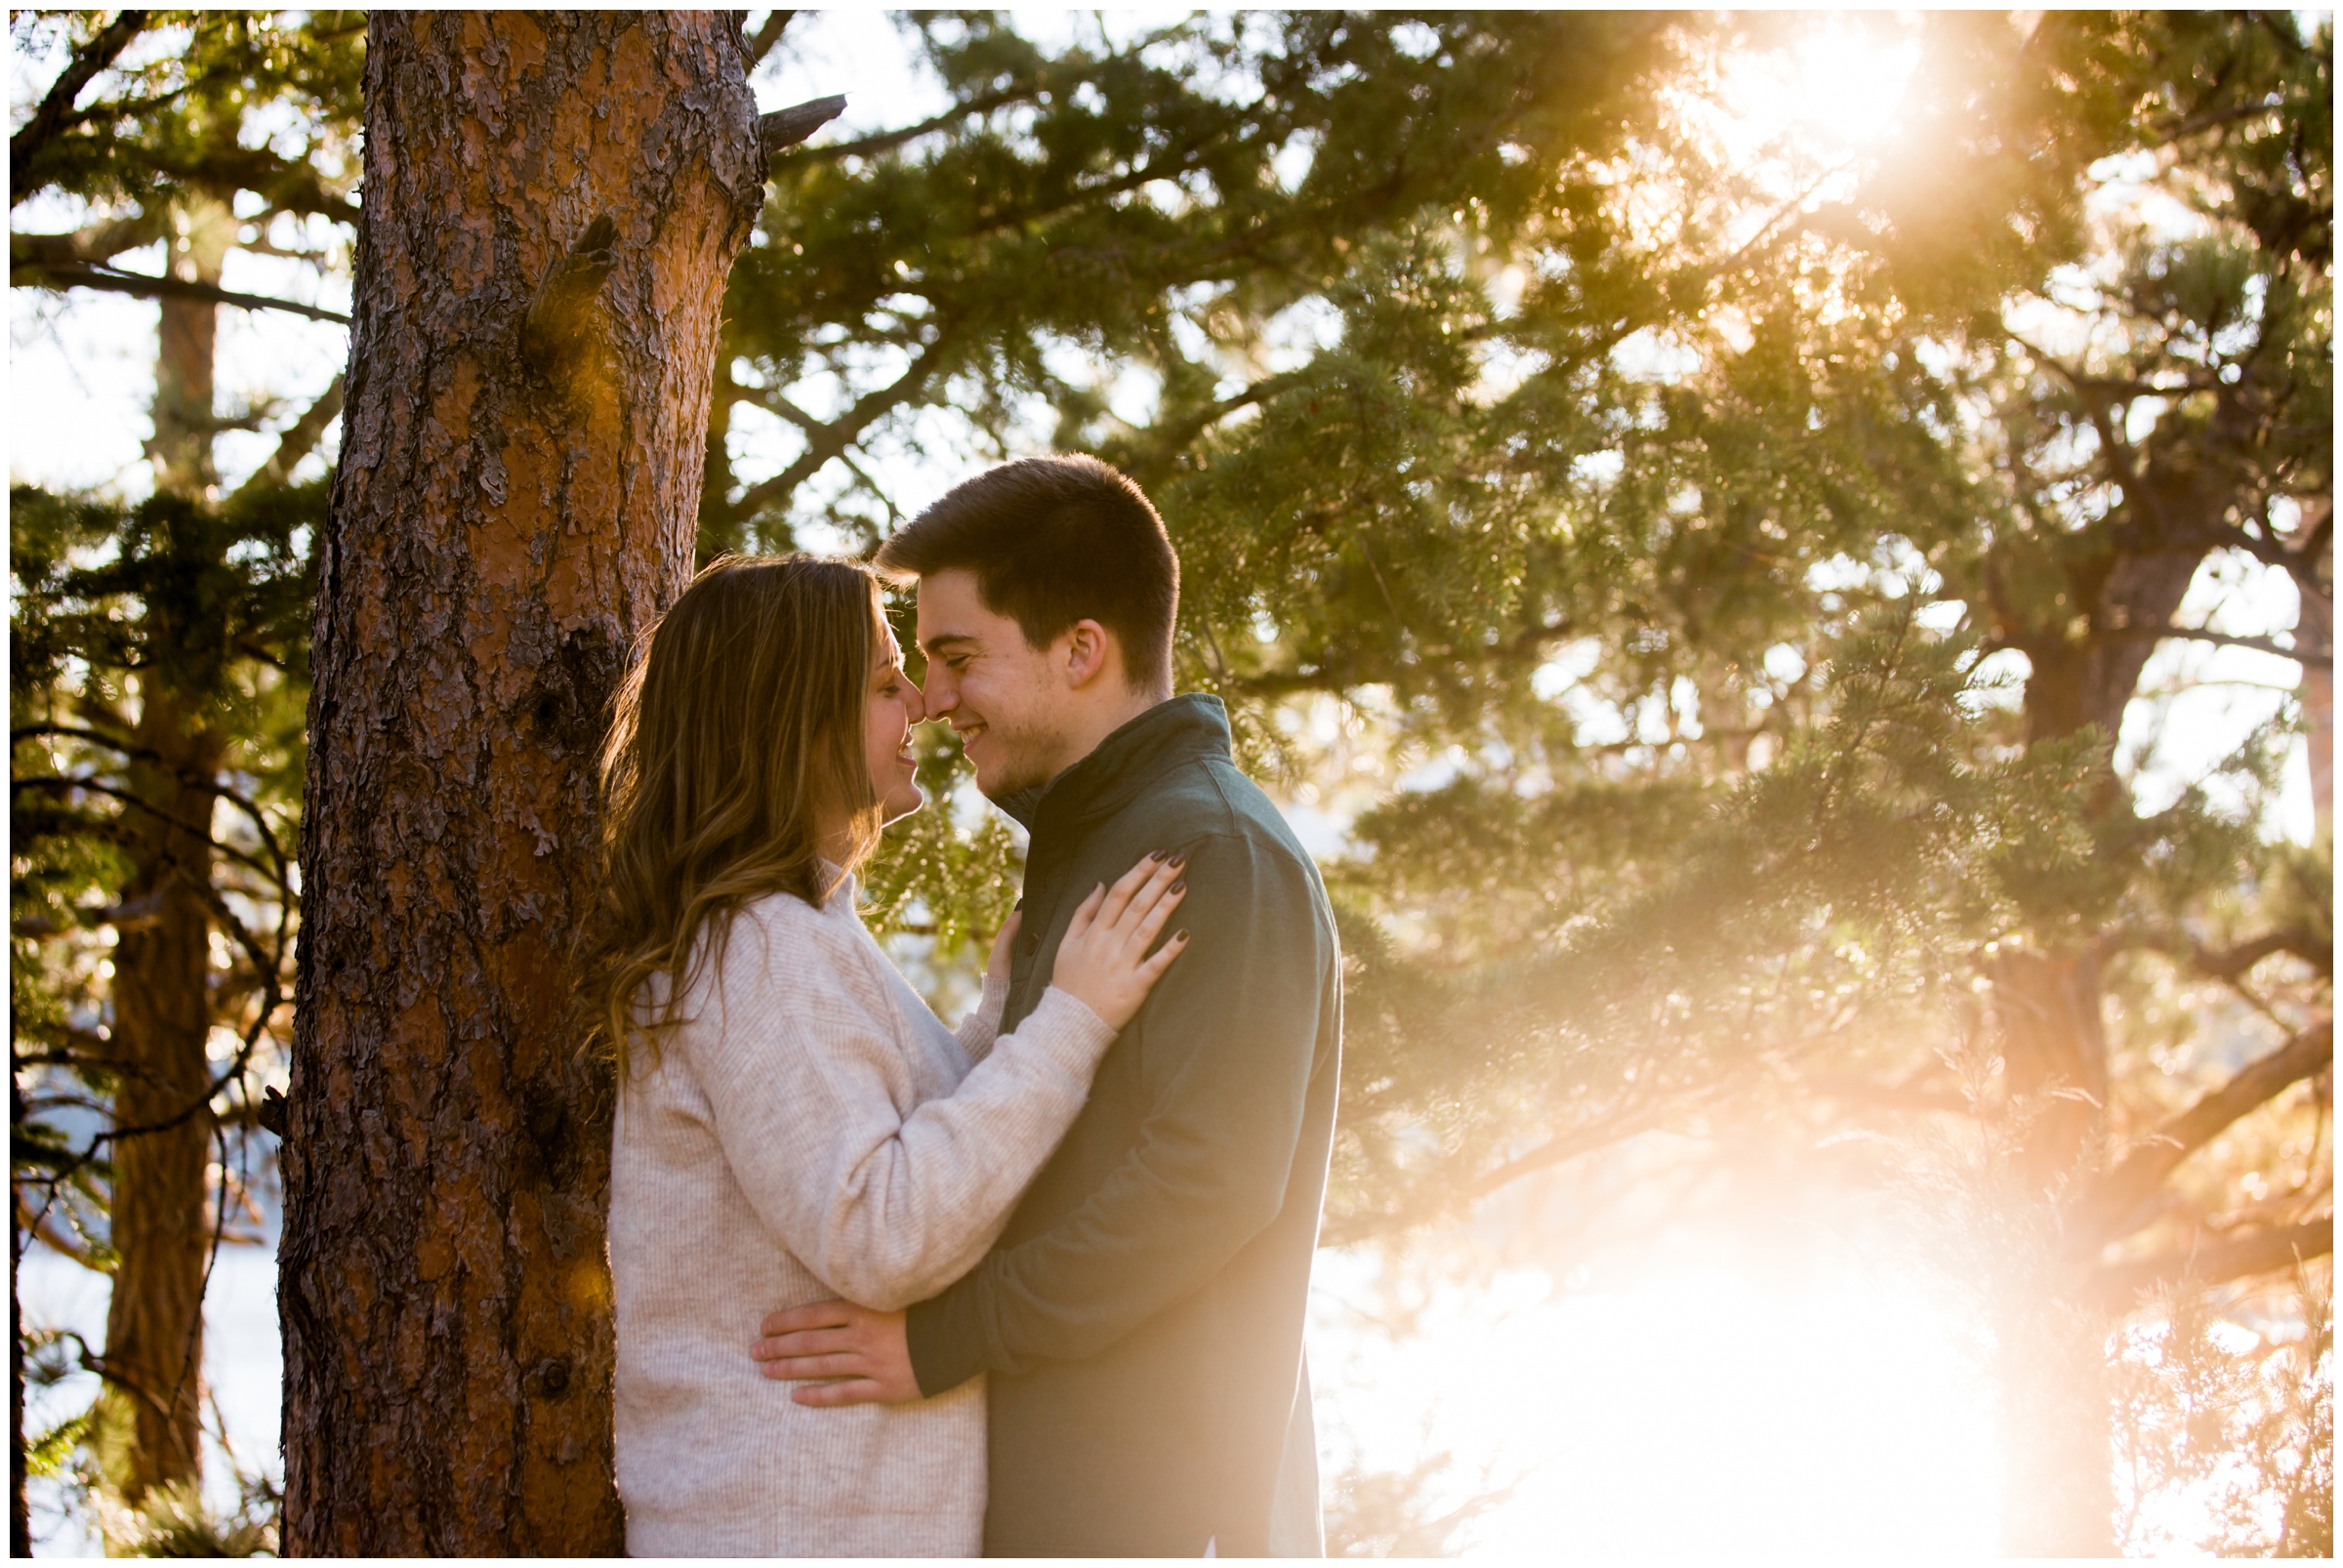 Boulder Colorado forest engagement photography inspiration by Plum Pretty Photo 